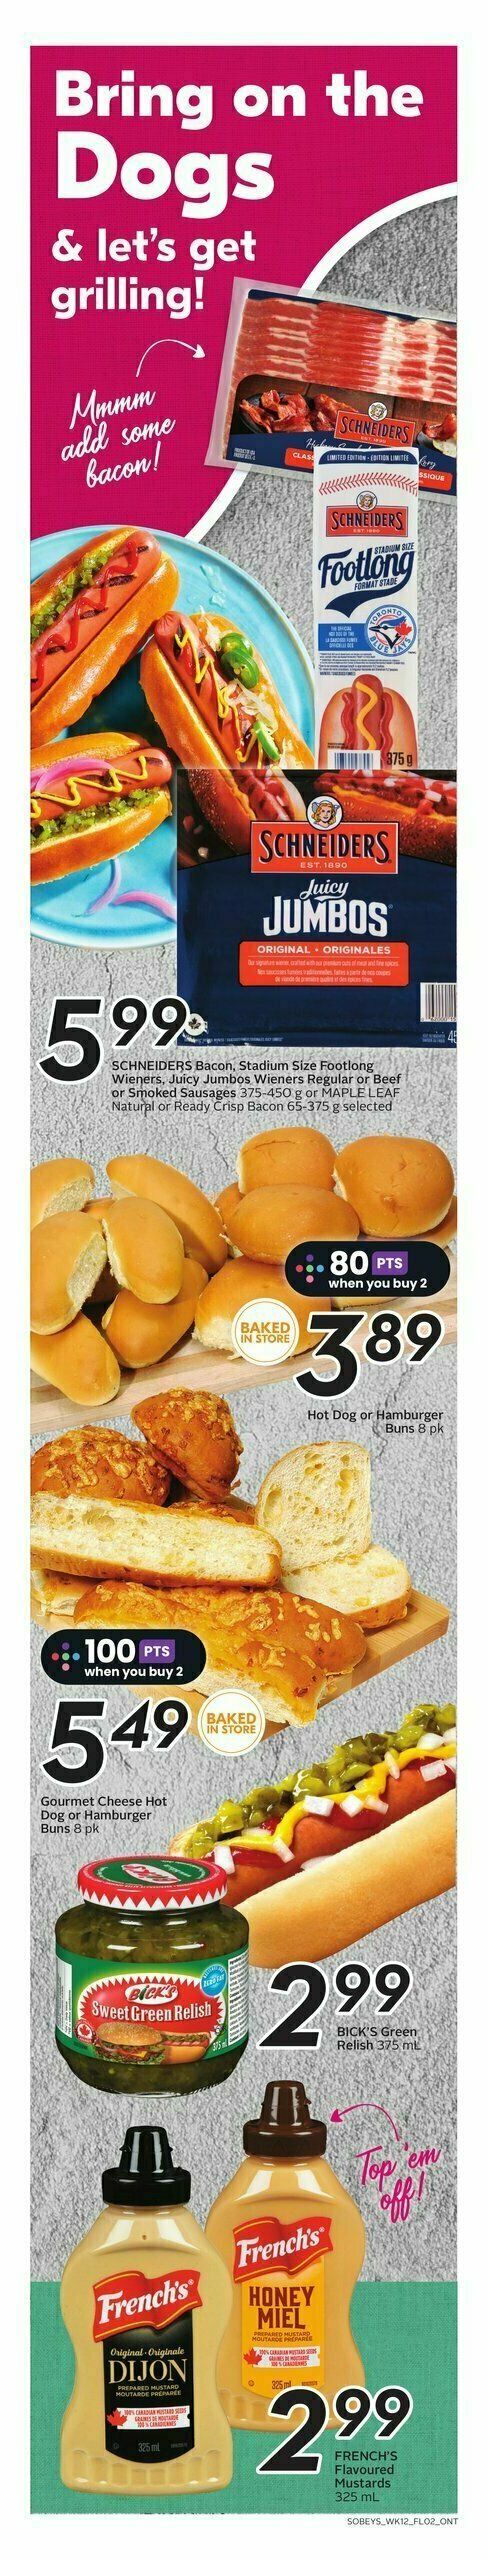 Sobeys Flyer from July 20